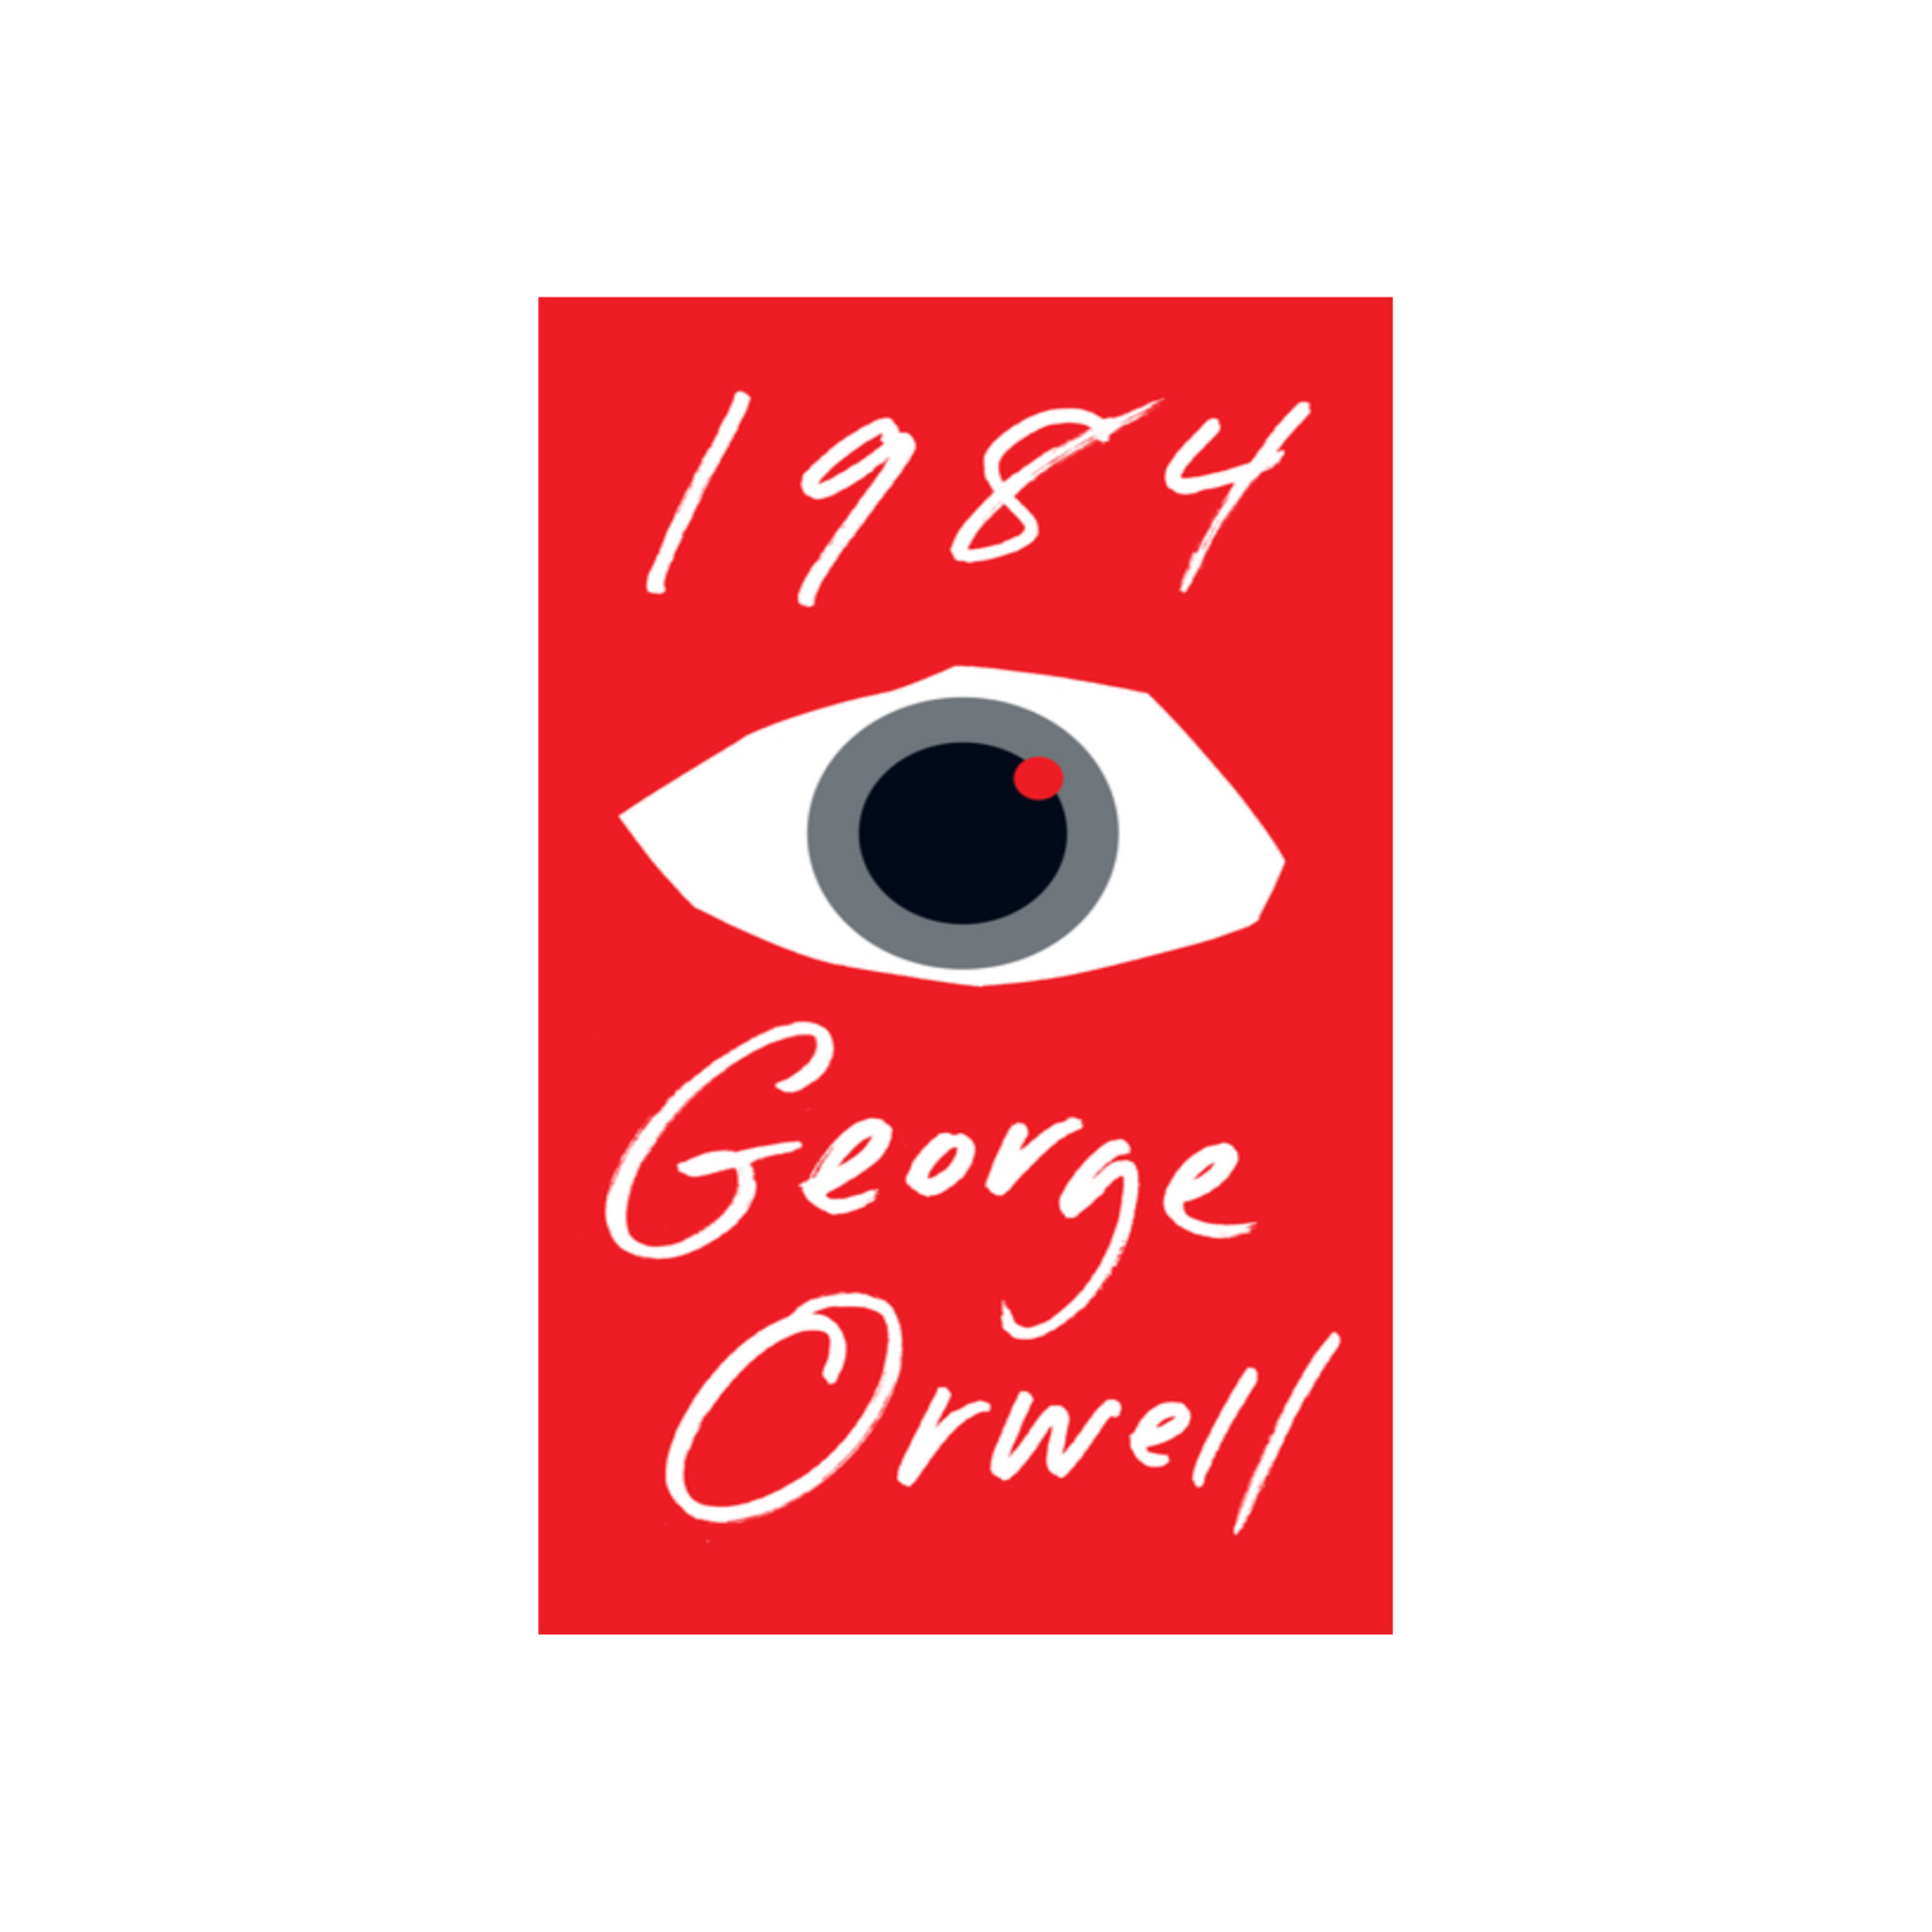 1984 by George Orwell – Daily Wire Shop